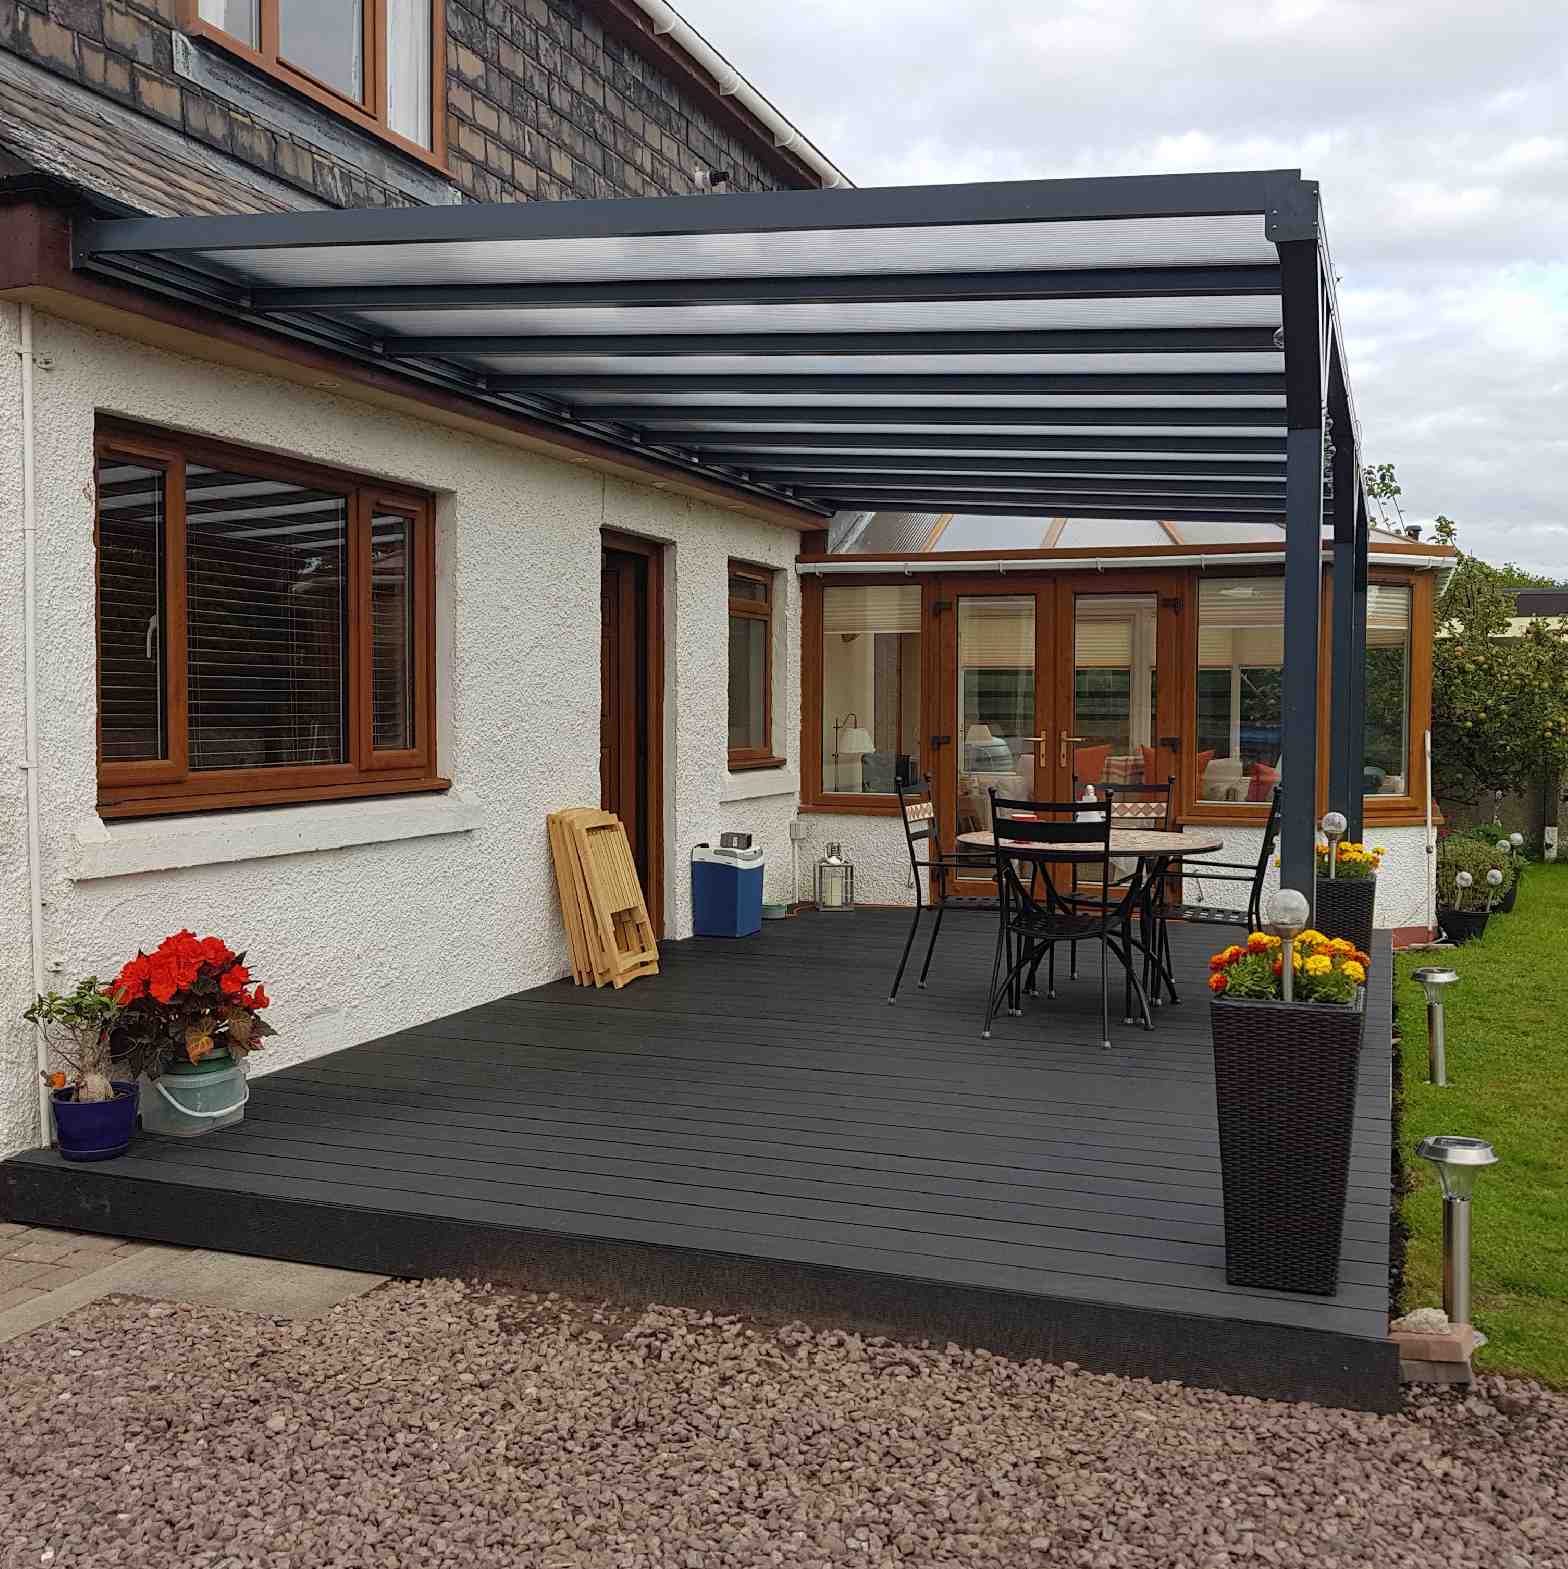 Buy Omega Verandah, Anthracite Grey, 16mm Polycarbonate Glazing - 4.2m (W) x 2.5m (P), (3) Supporting Posts online today